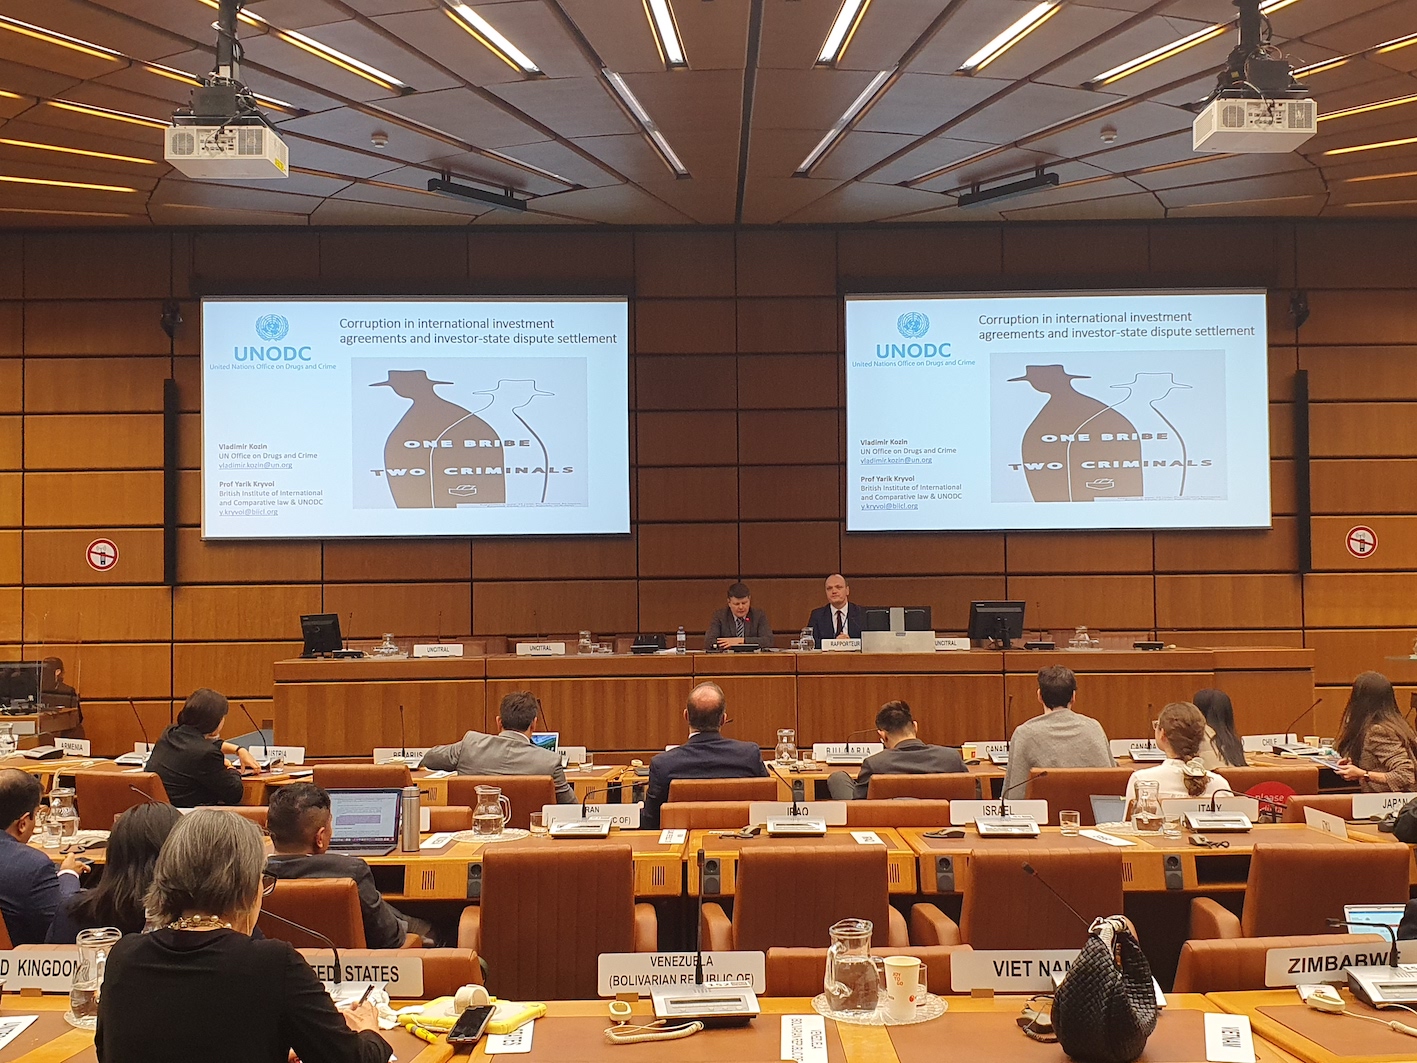 44th session of the UNCITRAL Working Group III: Code of Conduct for Arbitrators, its Enforcement, Corruption Allegations in ISDS